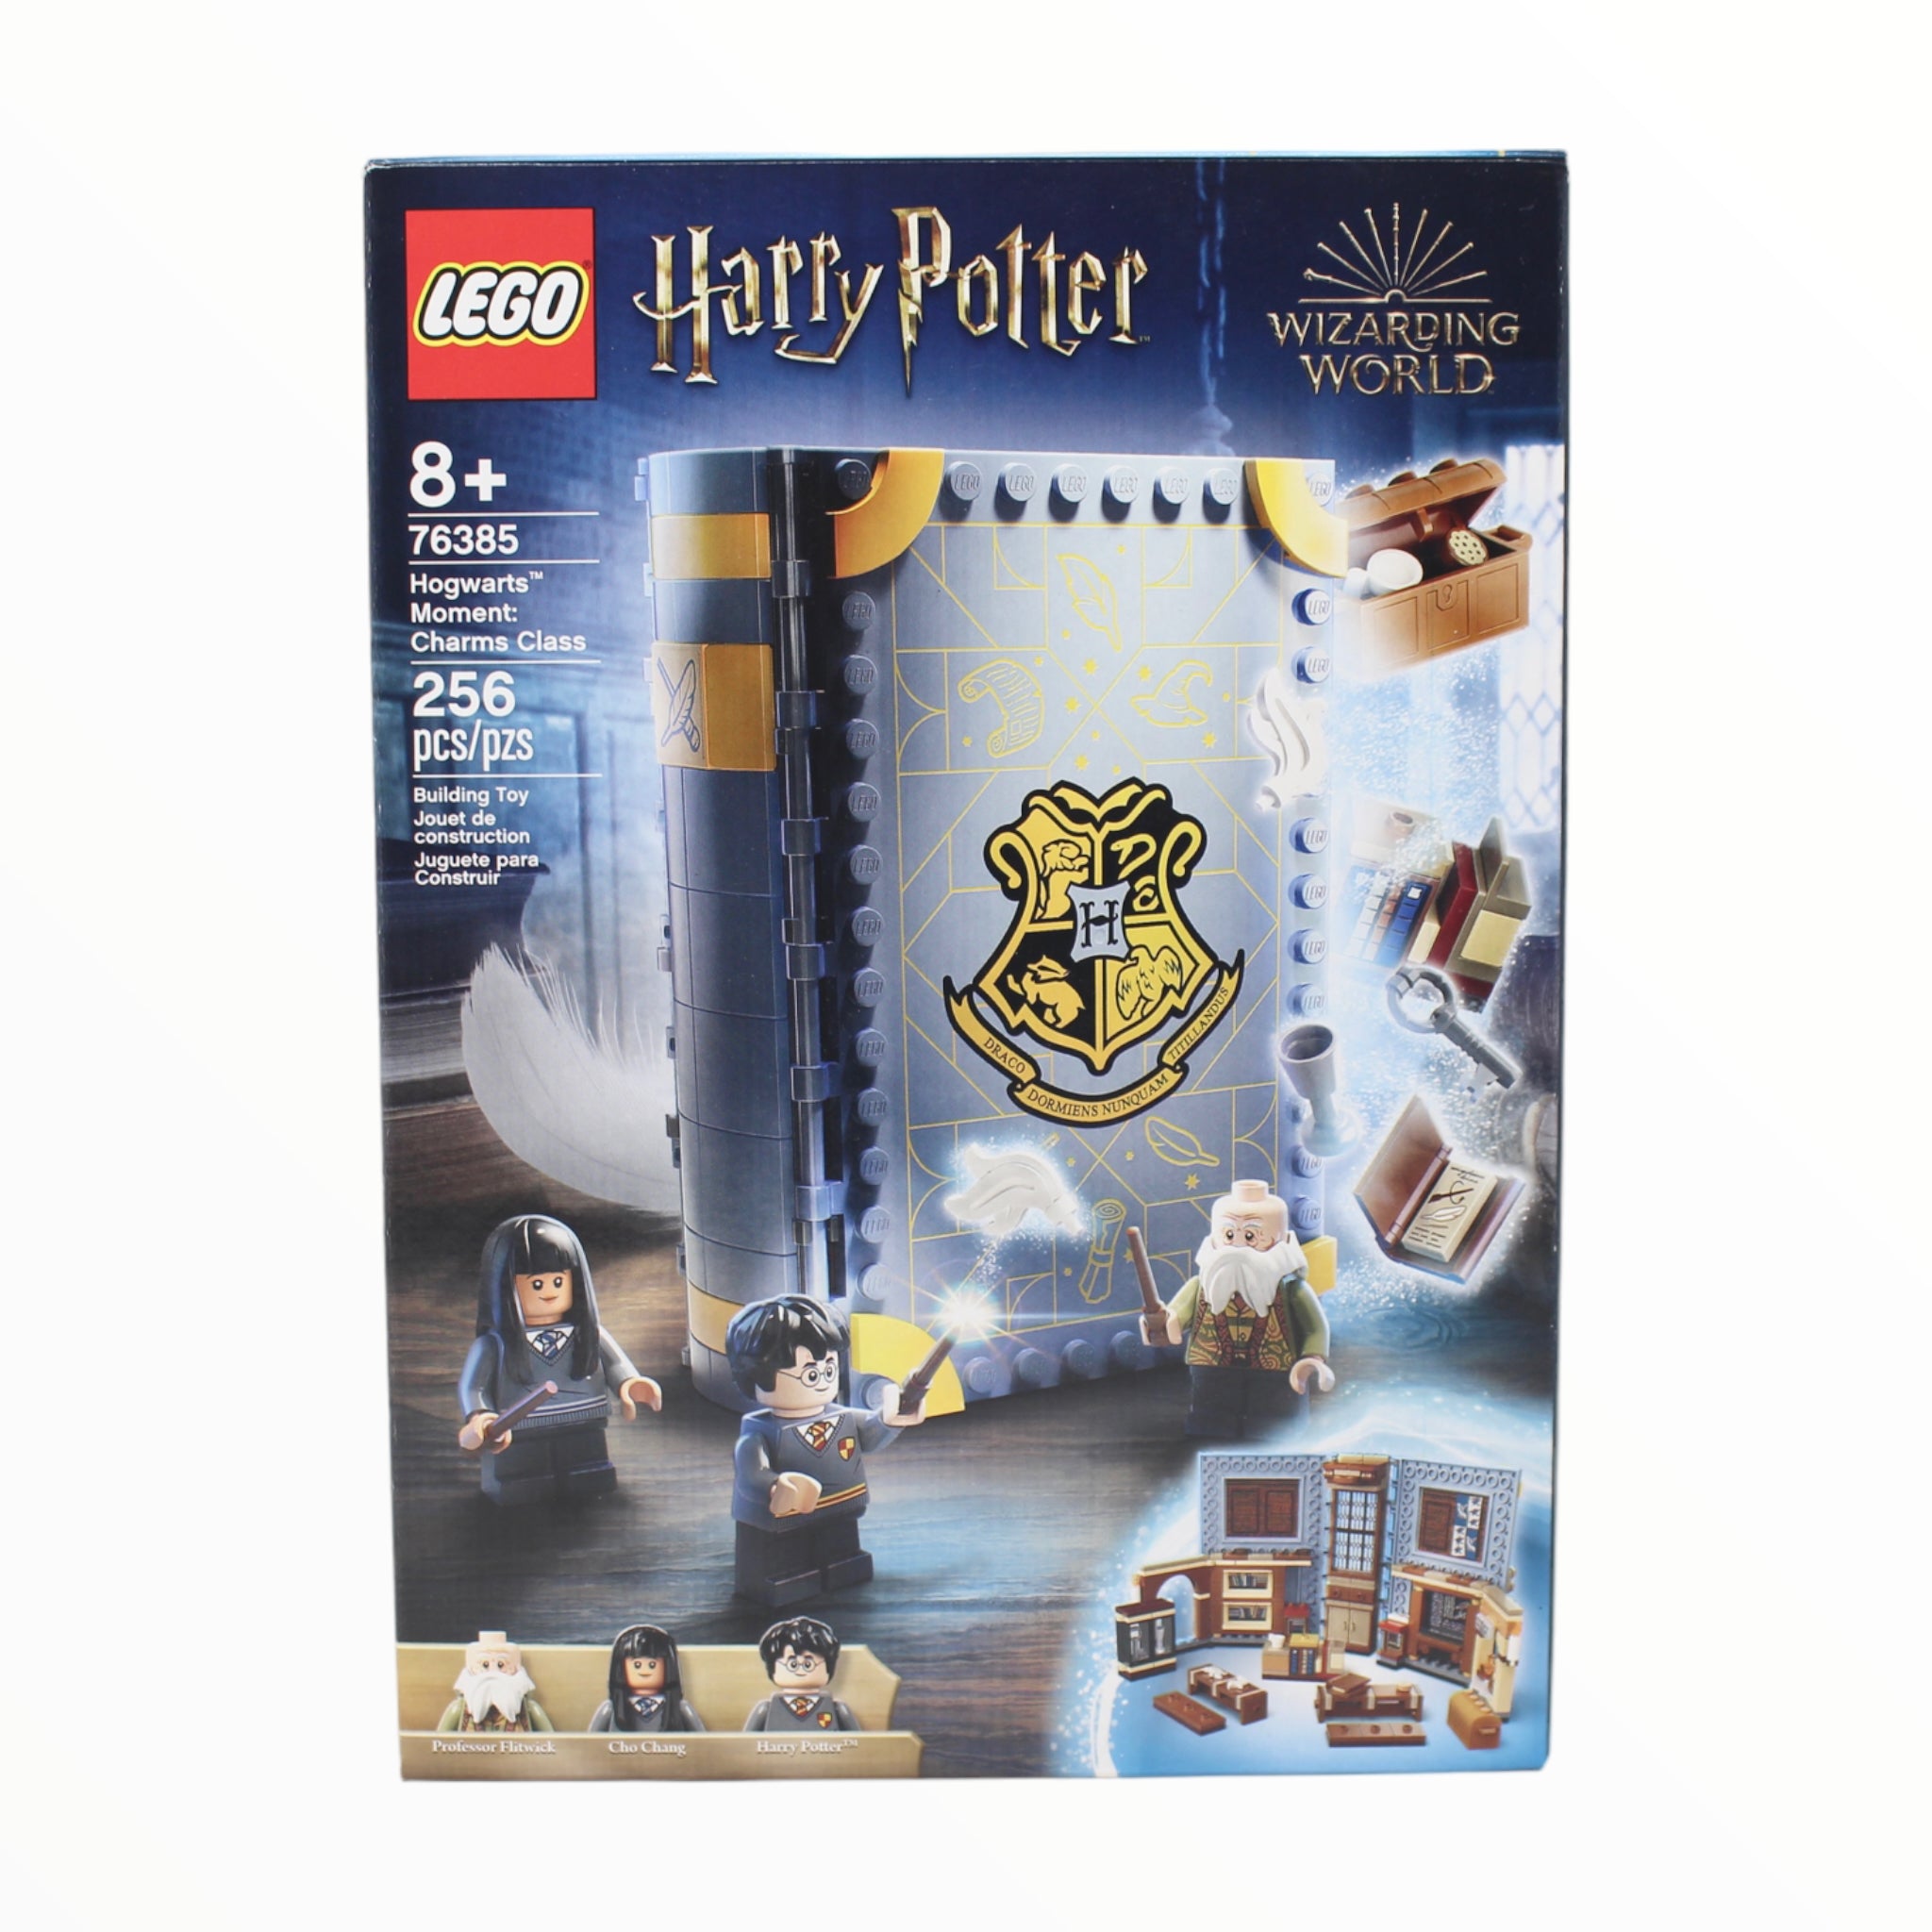 Certified Used Set 76385 Harry Potter Hogwarts Moment: Charms Class